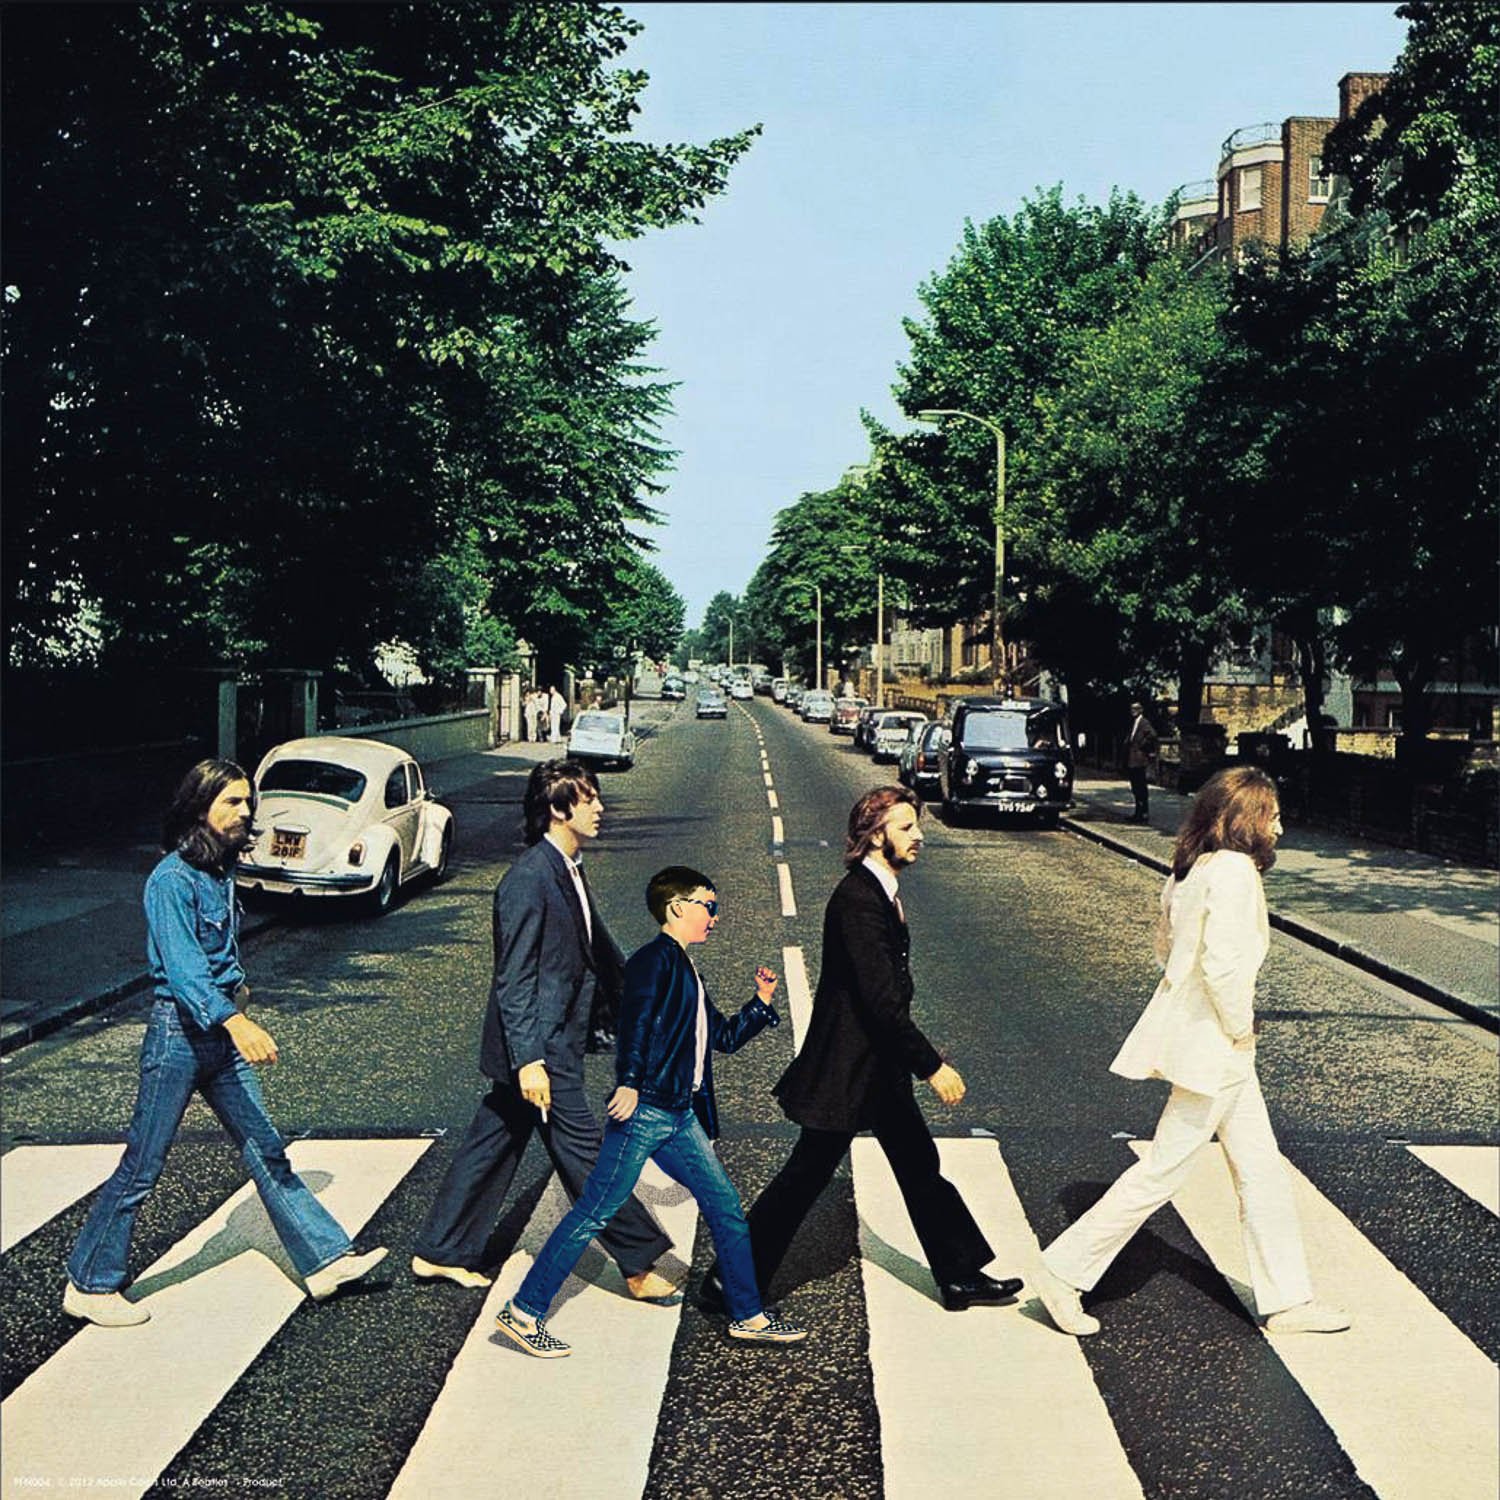 A young boy walking with The Beatles in Abbey Road album cover